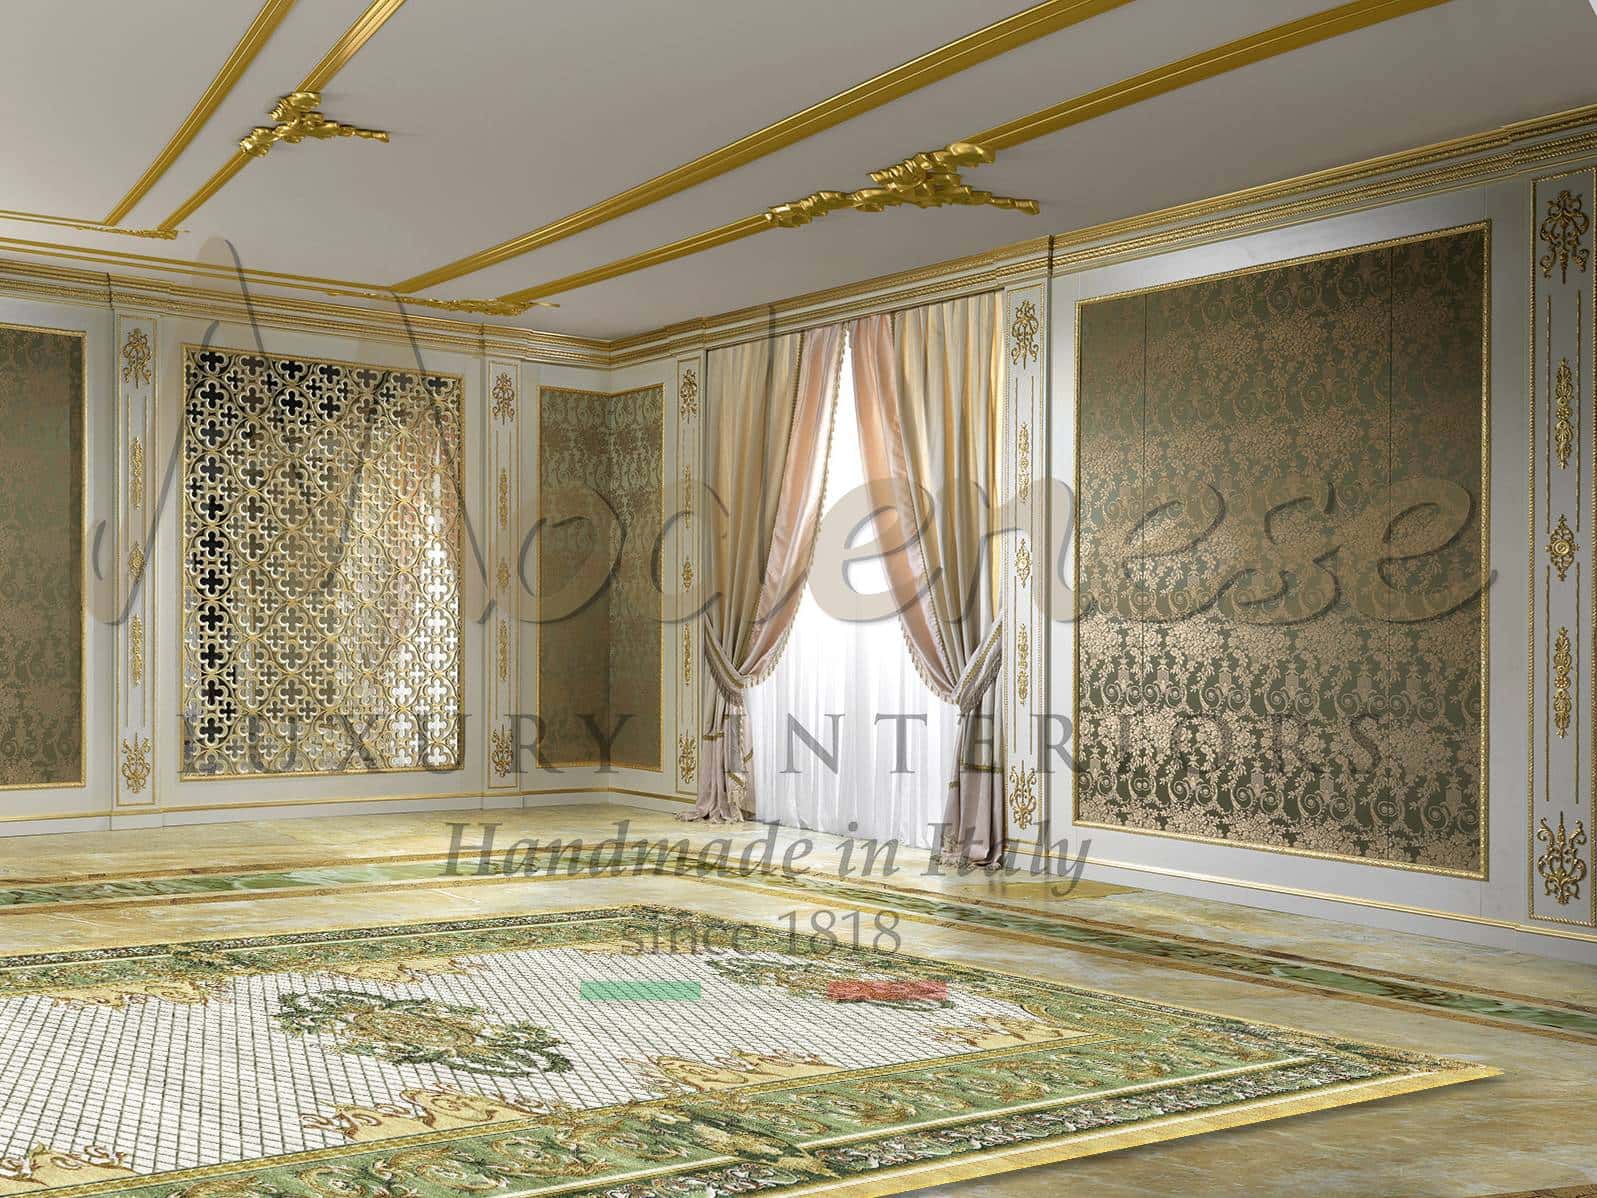 interior design service selection handmade italian designed carpets rugs ornamental details home décor luxury classic carpets accessories residential project baroque details gold golden opulent rich materials elegant custom-made interior design project